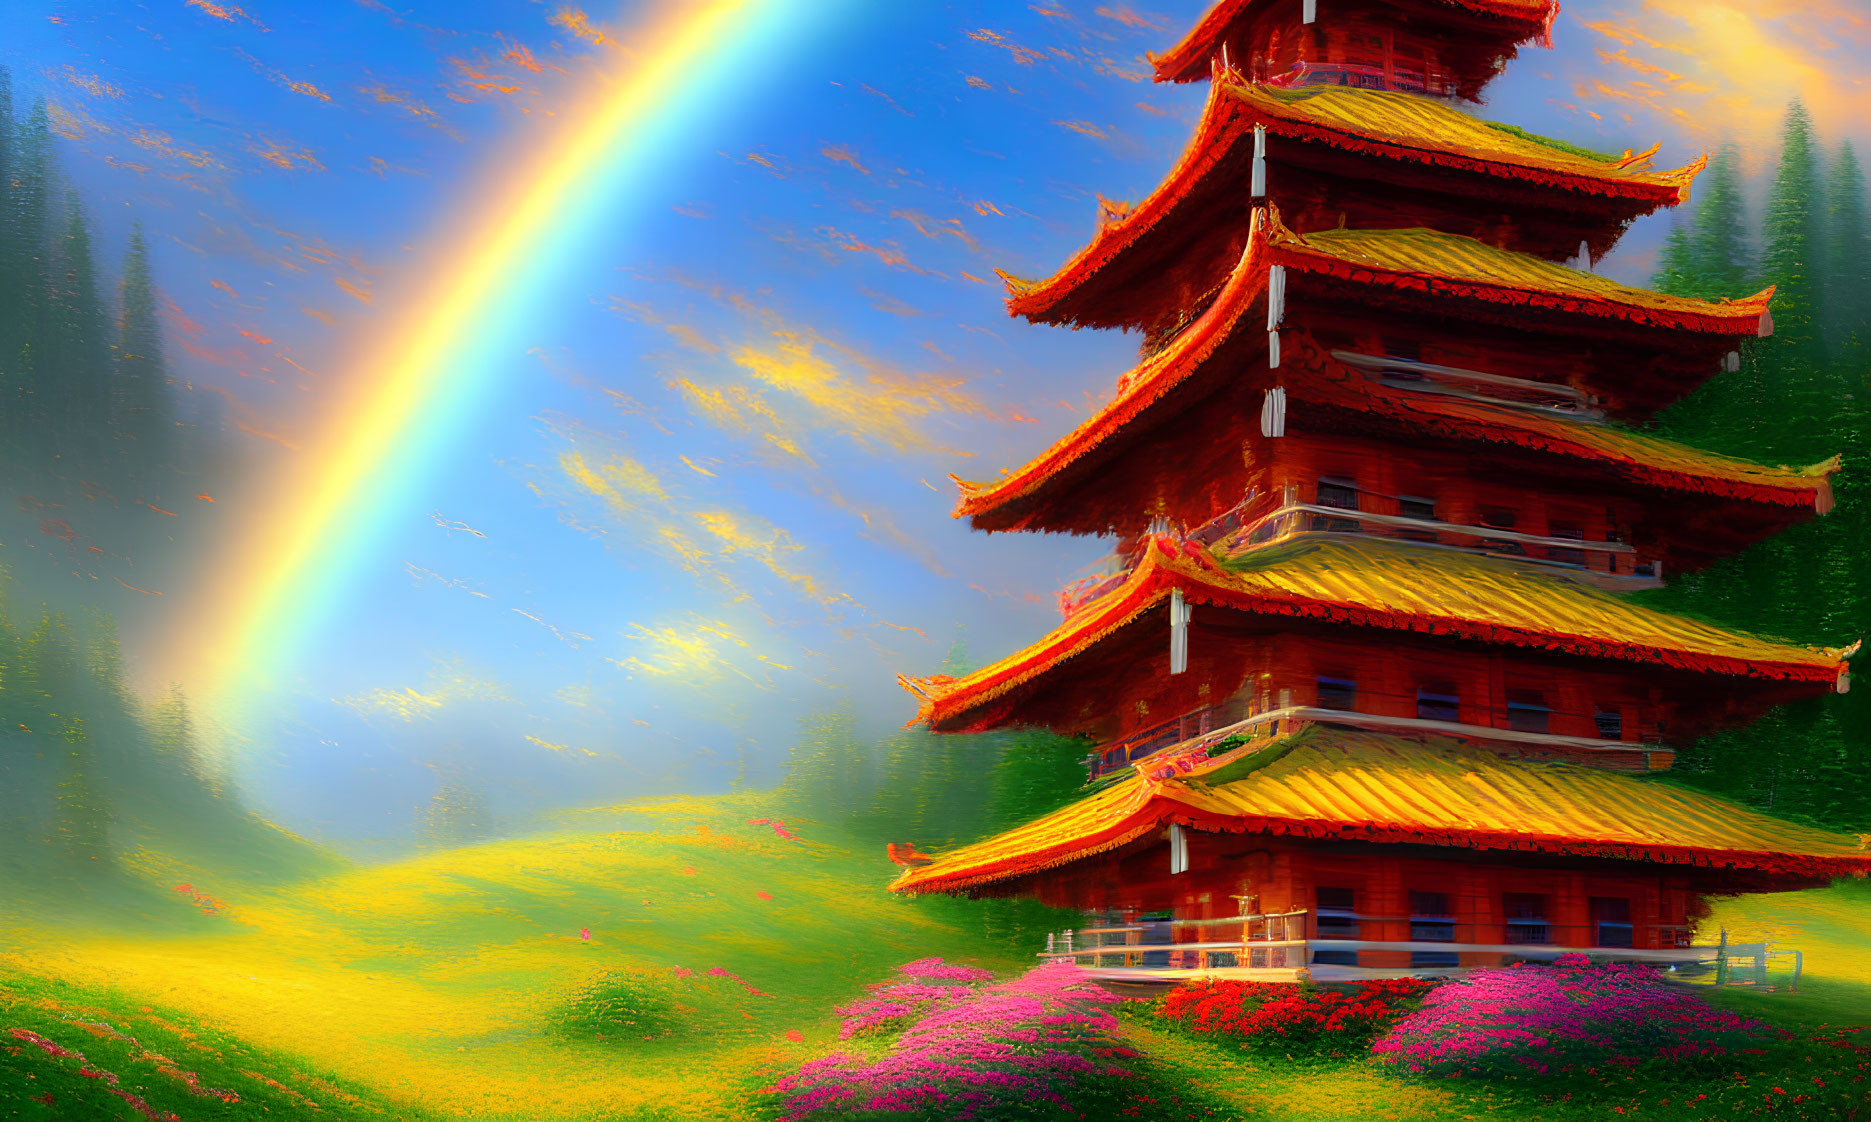 Red pagoda in vibrant floral landscape with rainbow and warm sky